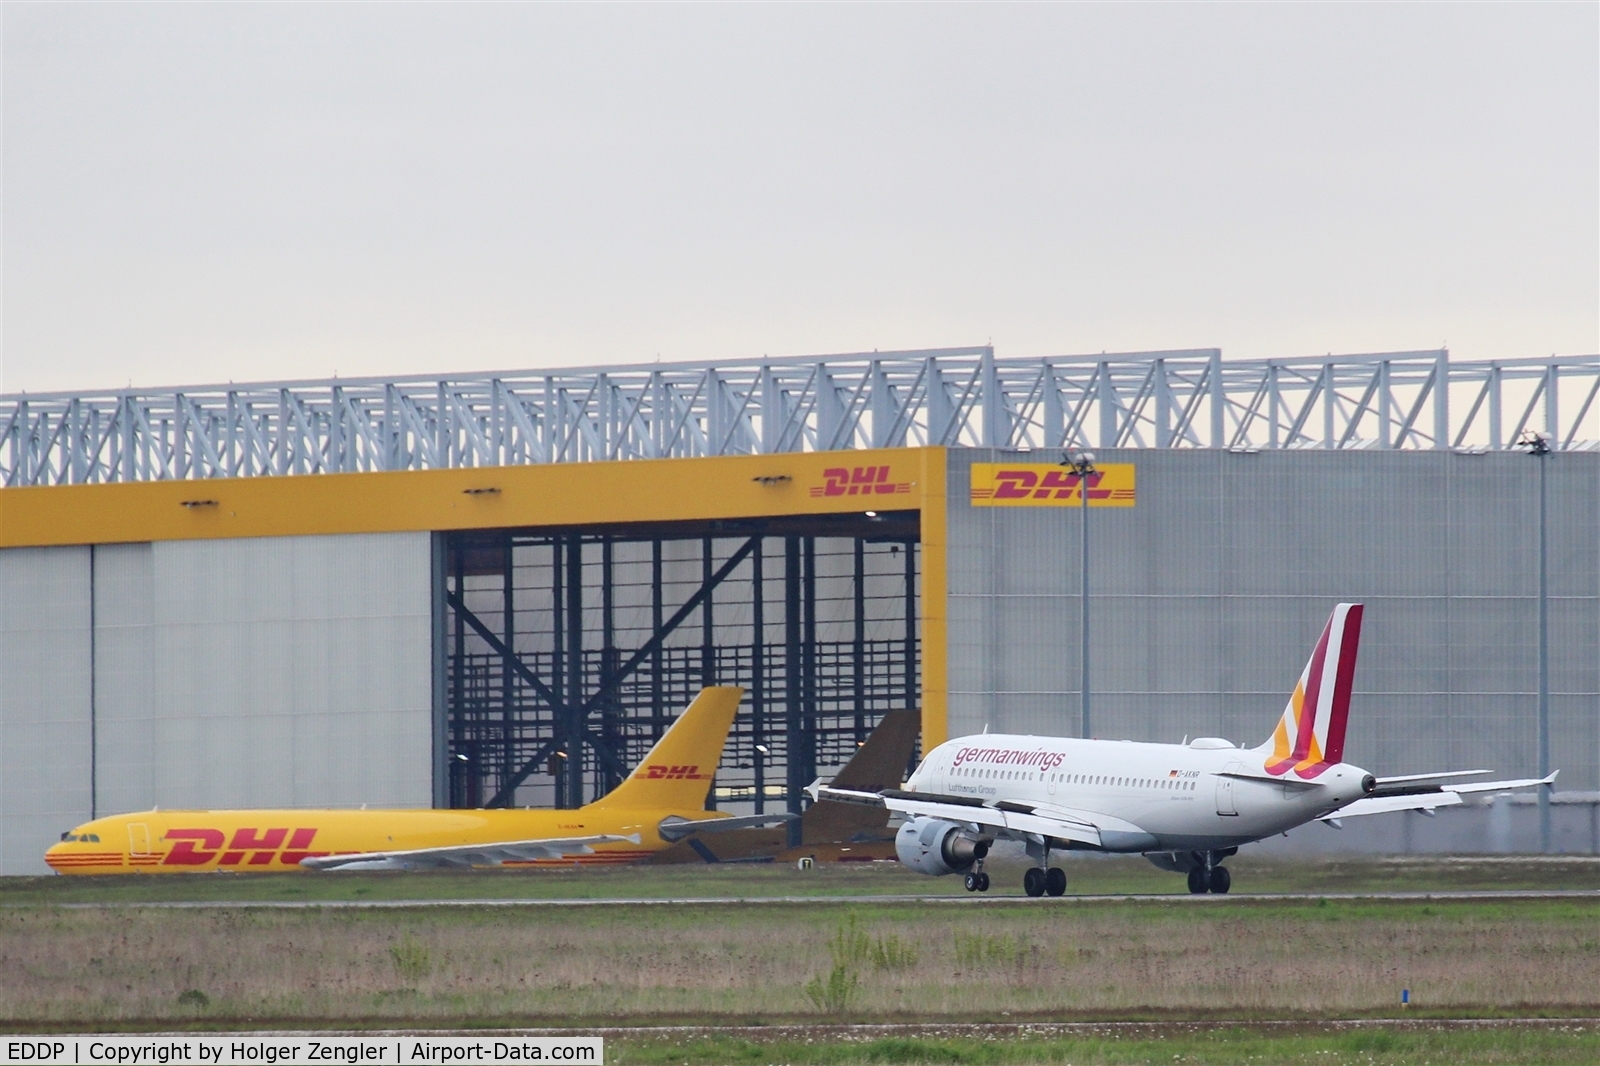 Leipzig/Halle Airport, Leipzig/Halle Germany (EDDP) - Inbound traffic on rwy 08R passes DHL parcel freighter .....